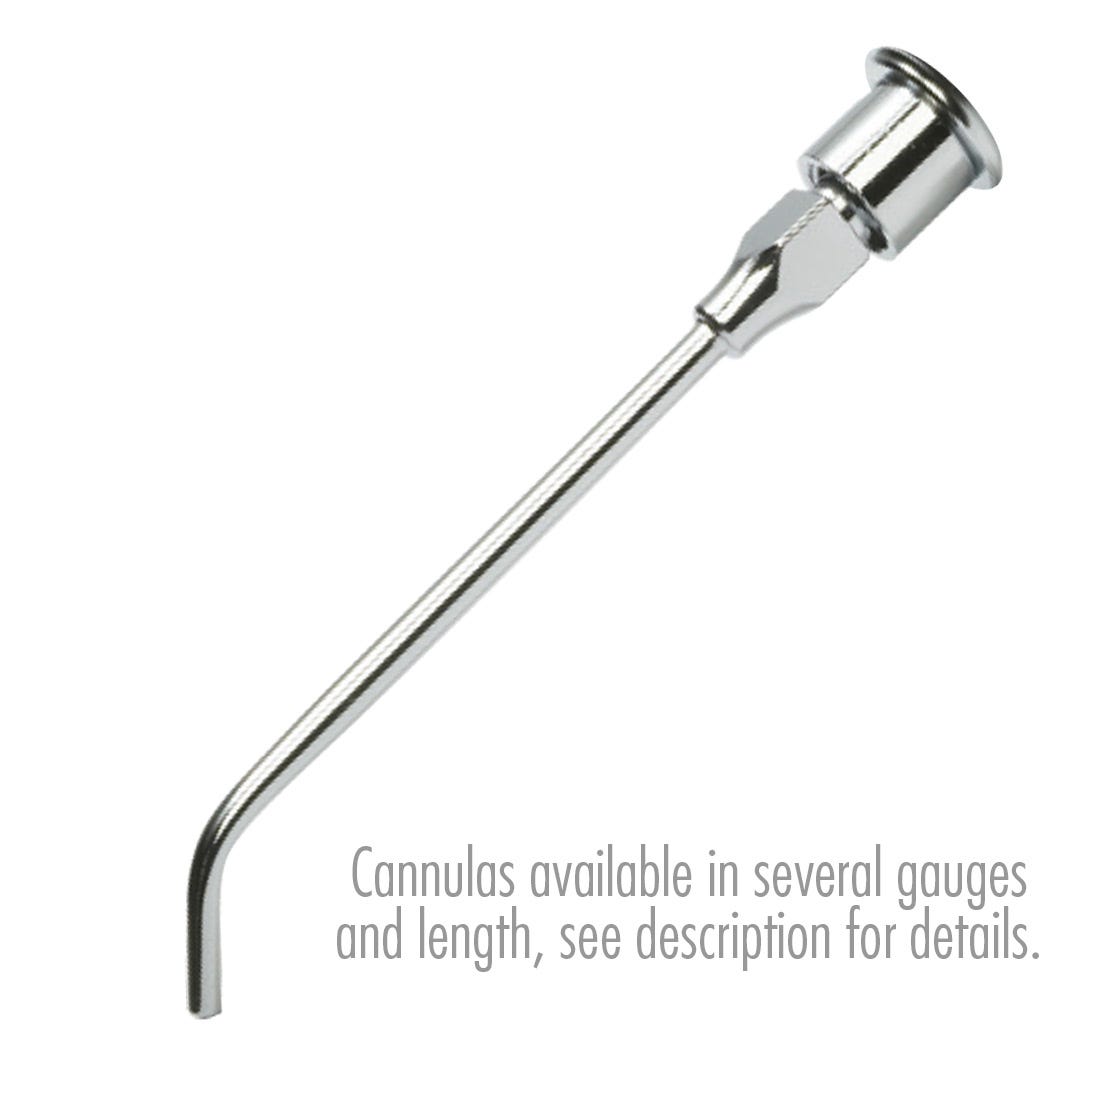 ACE Irrigation Cannula - Stainless Steel 14G x 1-1/4", 45 degree angle